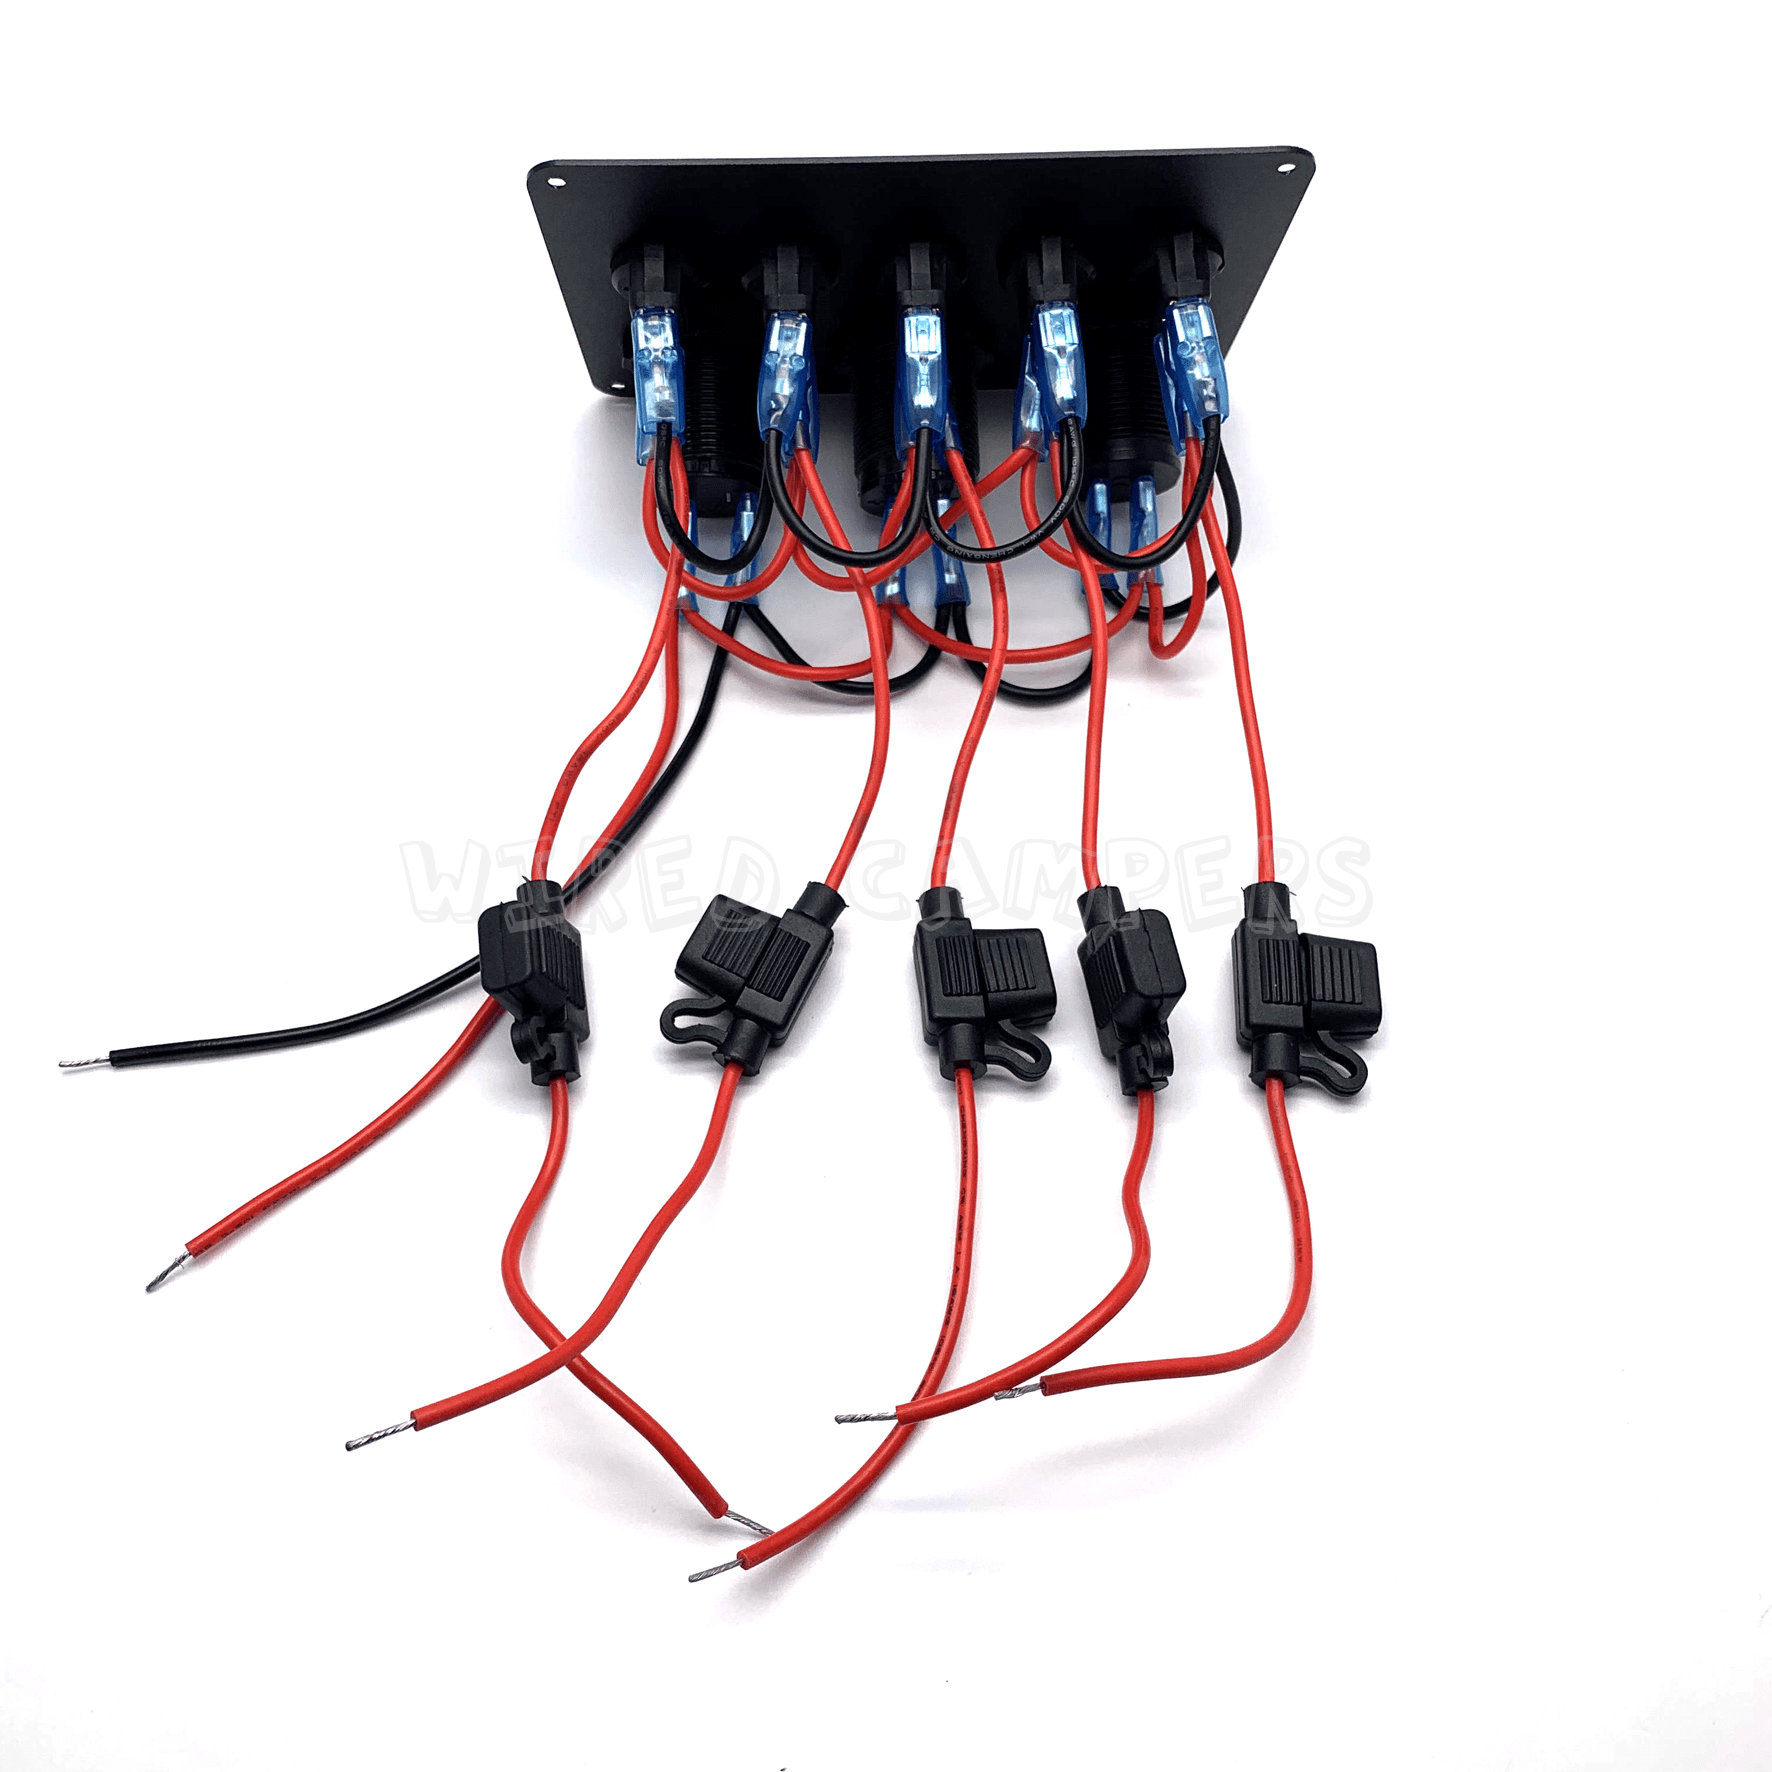 Wired Campers Control Panel 12V Camper/Caravan 5 Gang Switched USB Main Control Panel